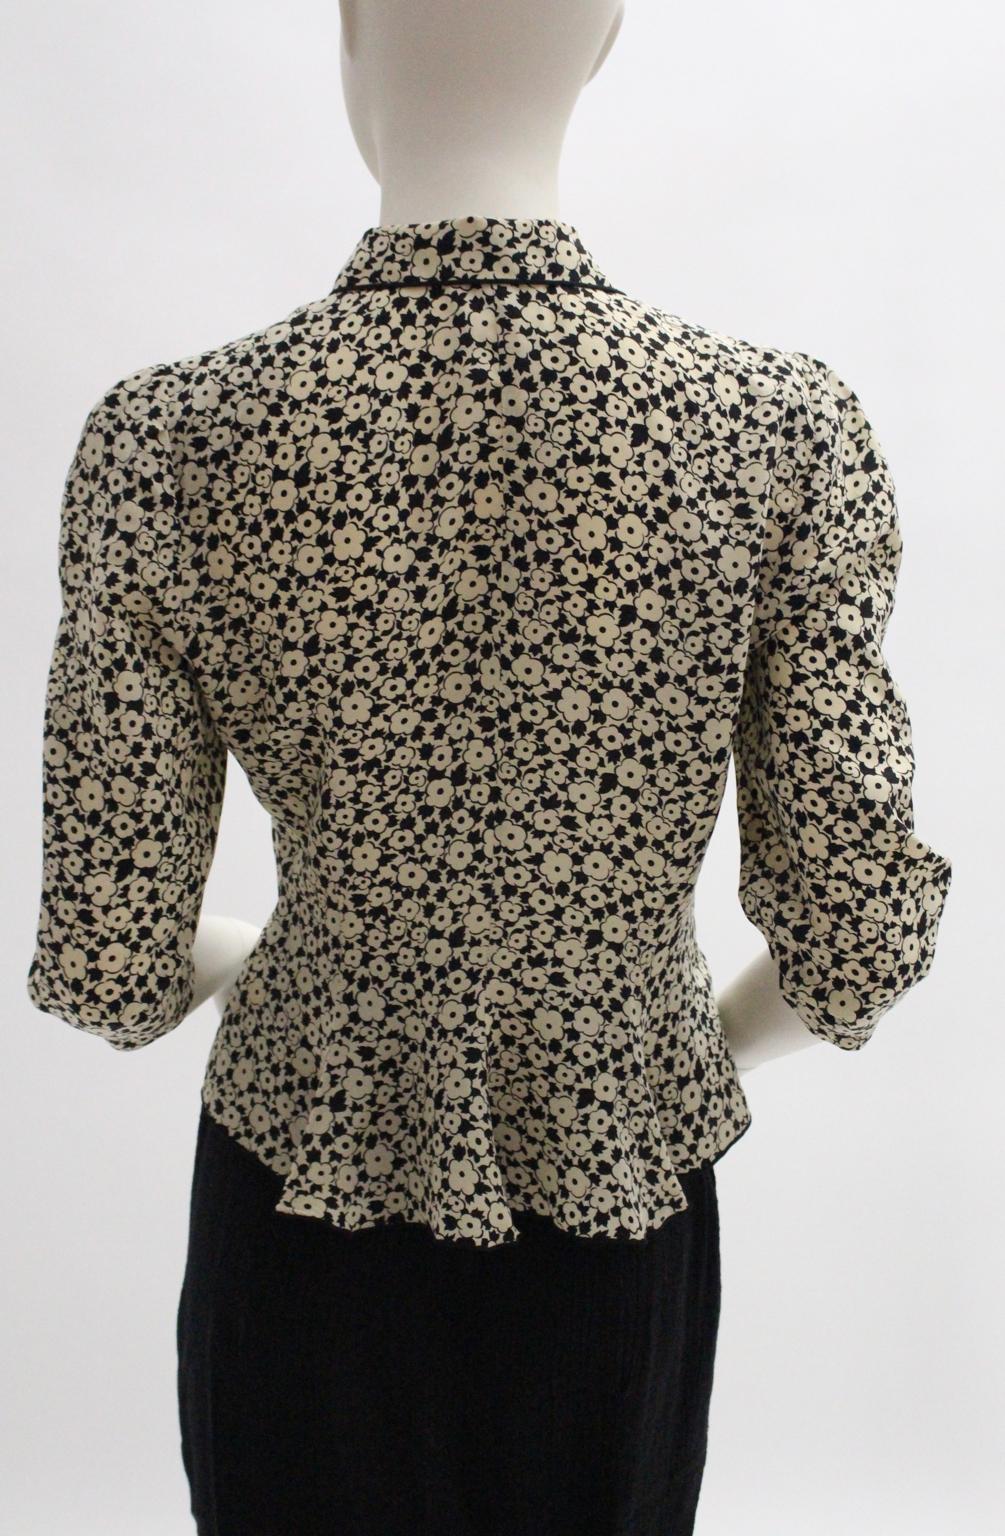 Lolita Lempicka Vintage Silk Blouse with Flower Allover Print  1980s For Sale 13